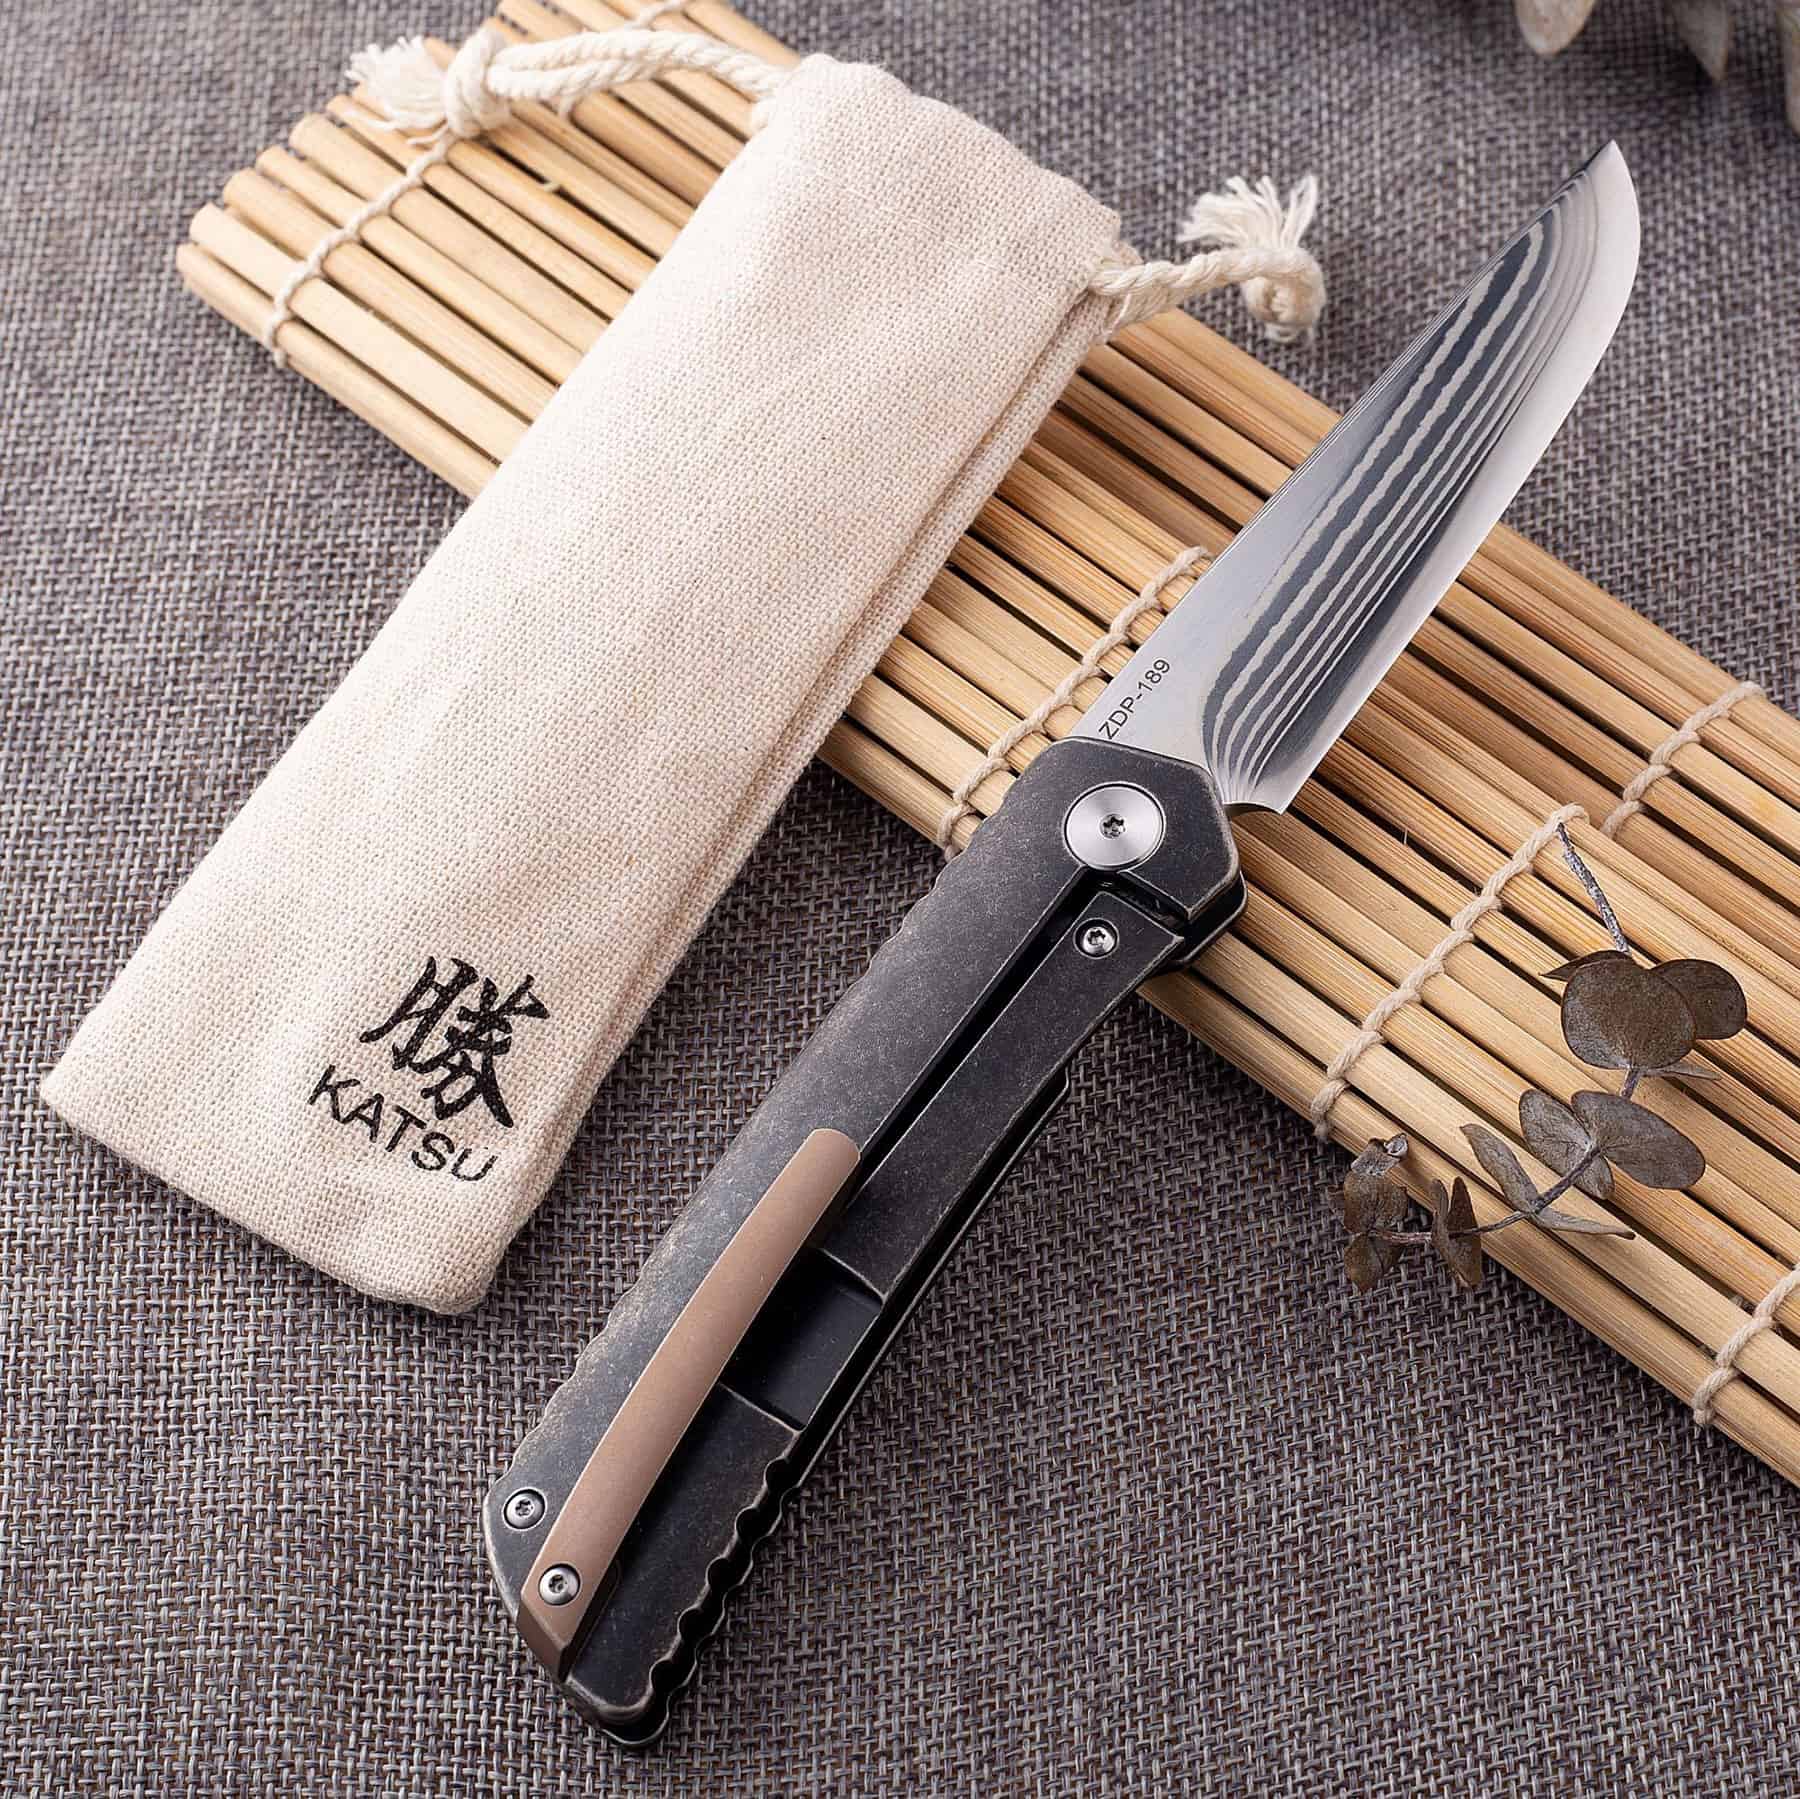 This premium Japanese pocket knife combines great aesthetics and excellent materials. 